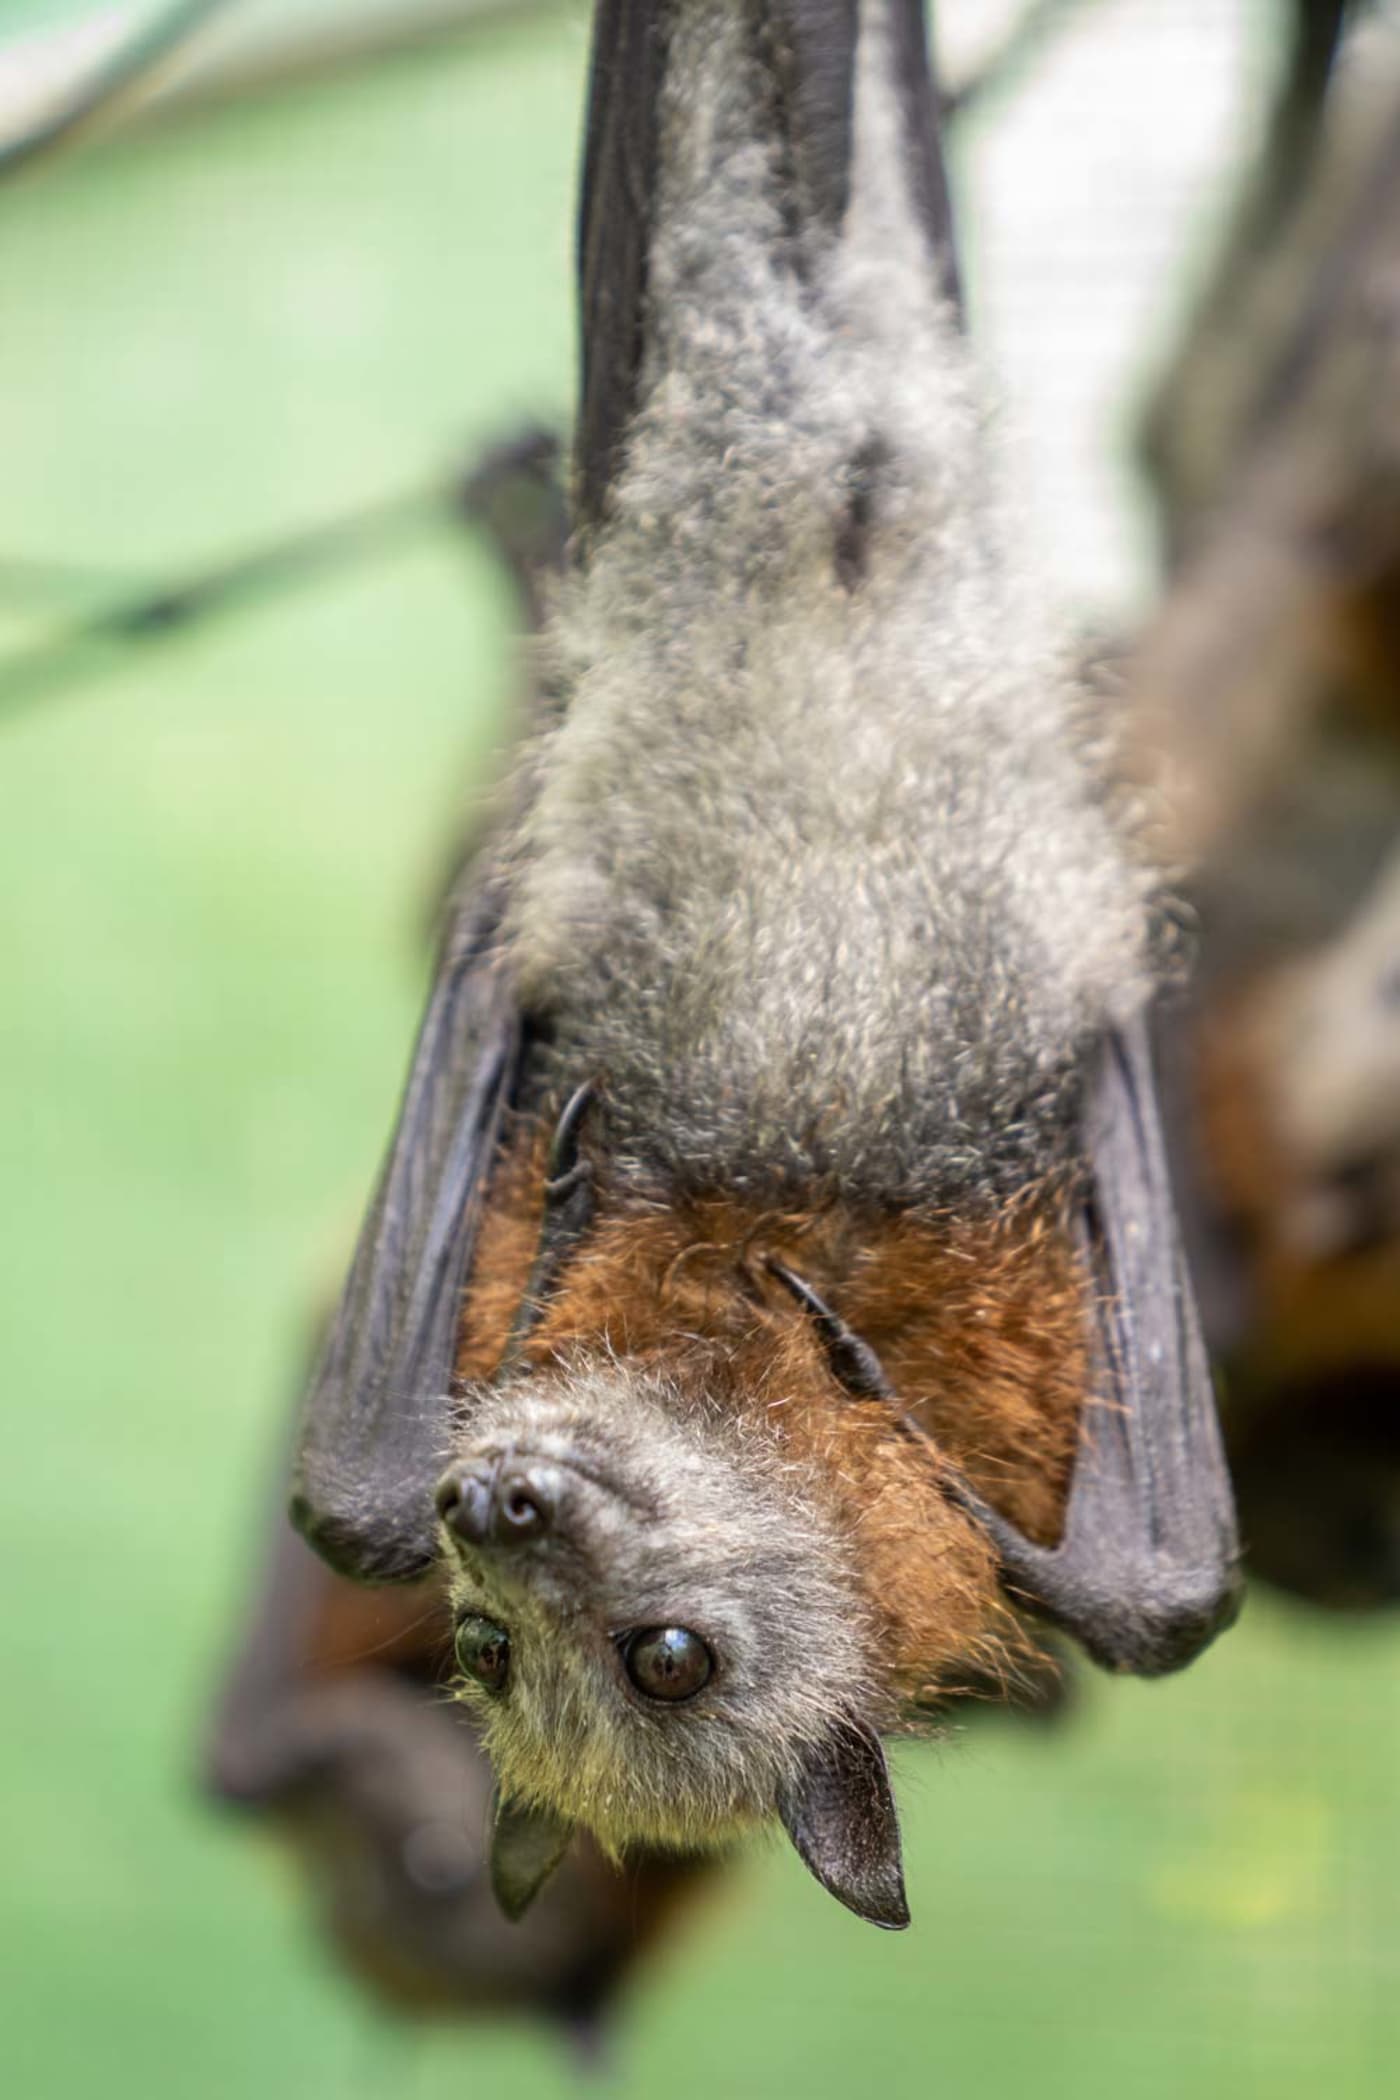 RJ the orphaned flying fox is in care with Dr Anne Fowler in Adelaide